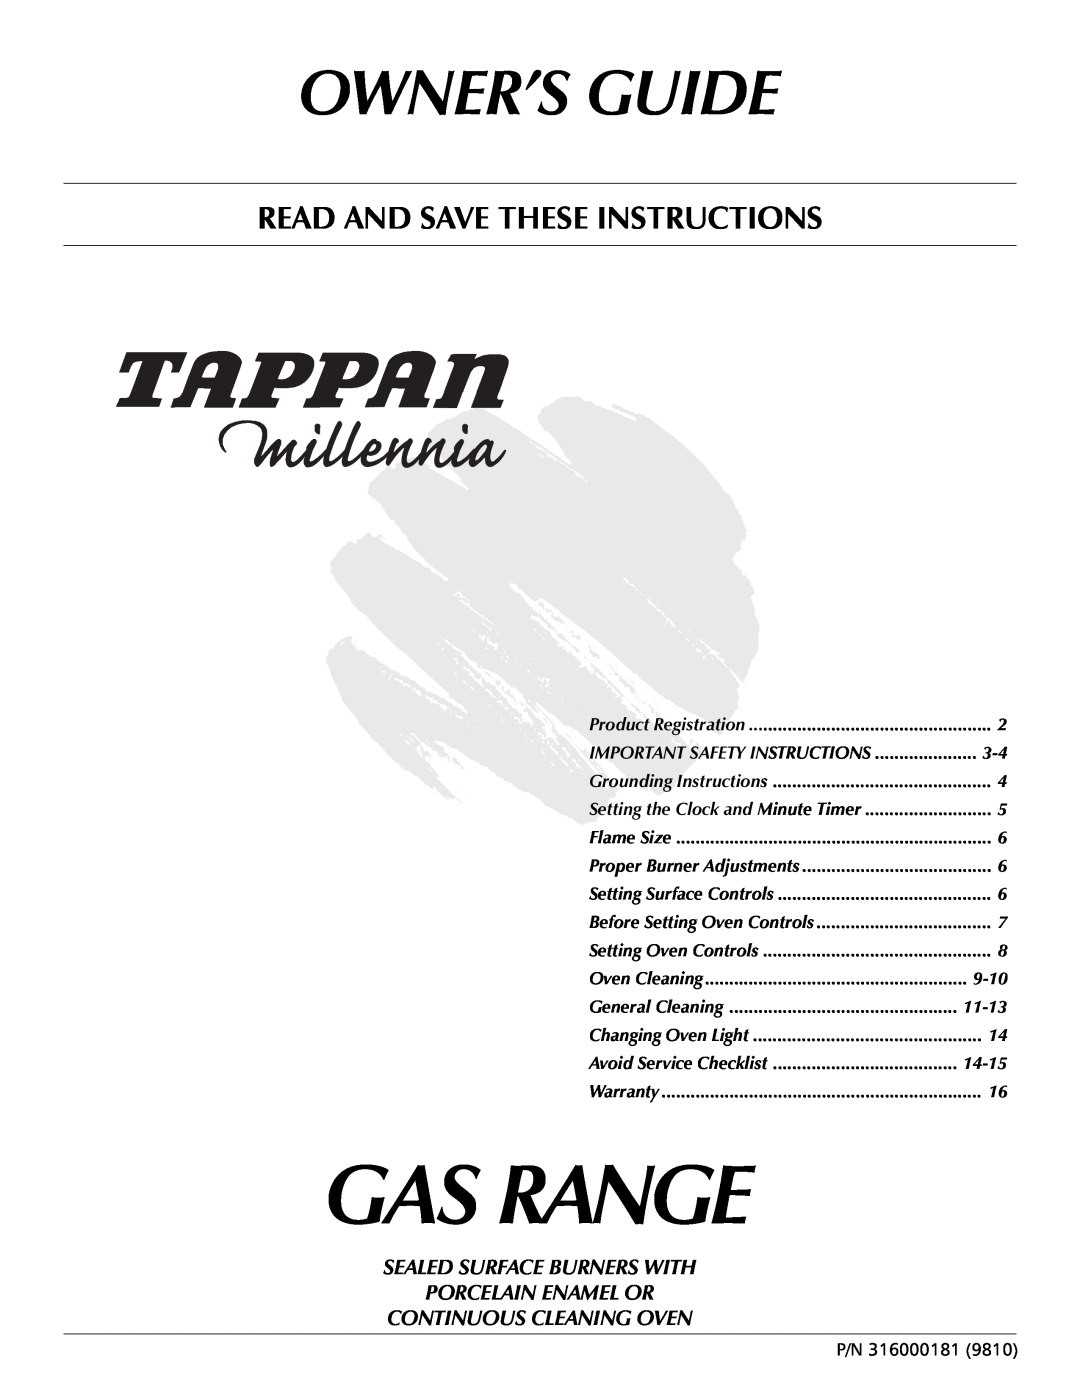 Tappan 316000181 important safety instructions Gas Range, Owner’S Guide, Read And Save These Instructions, 9-10, 11-13 